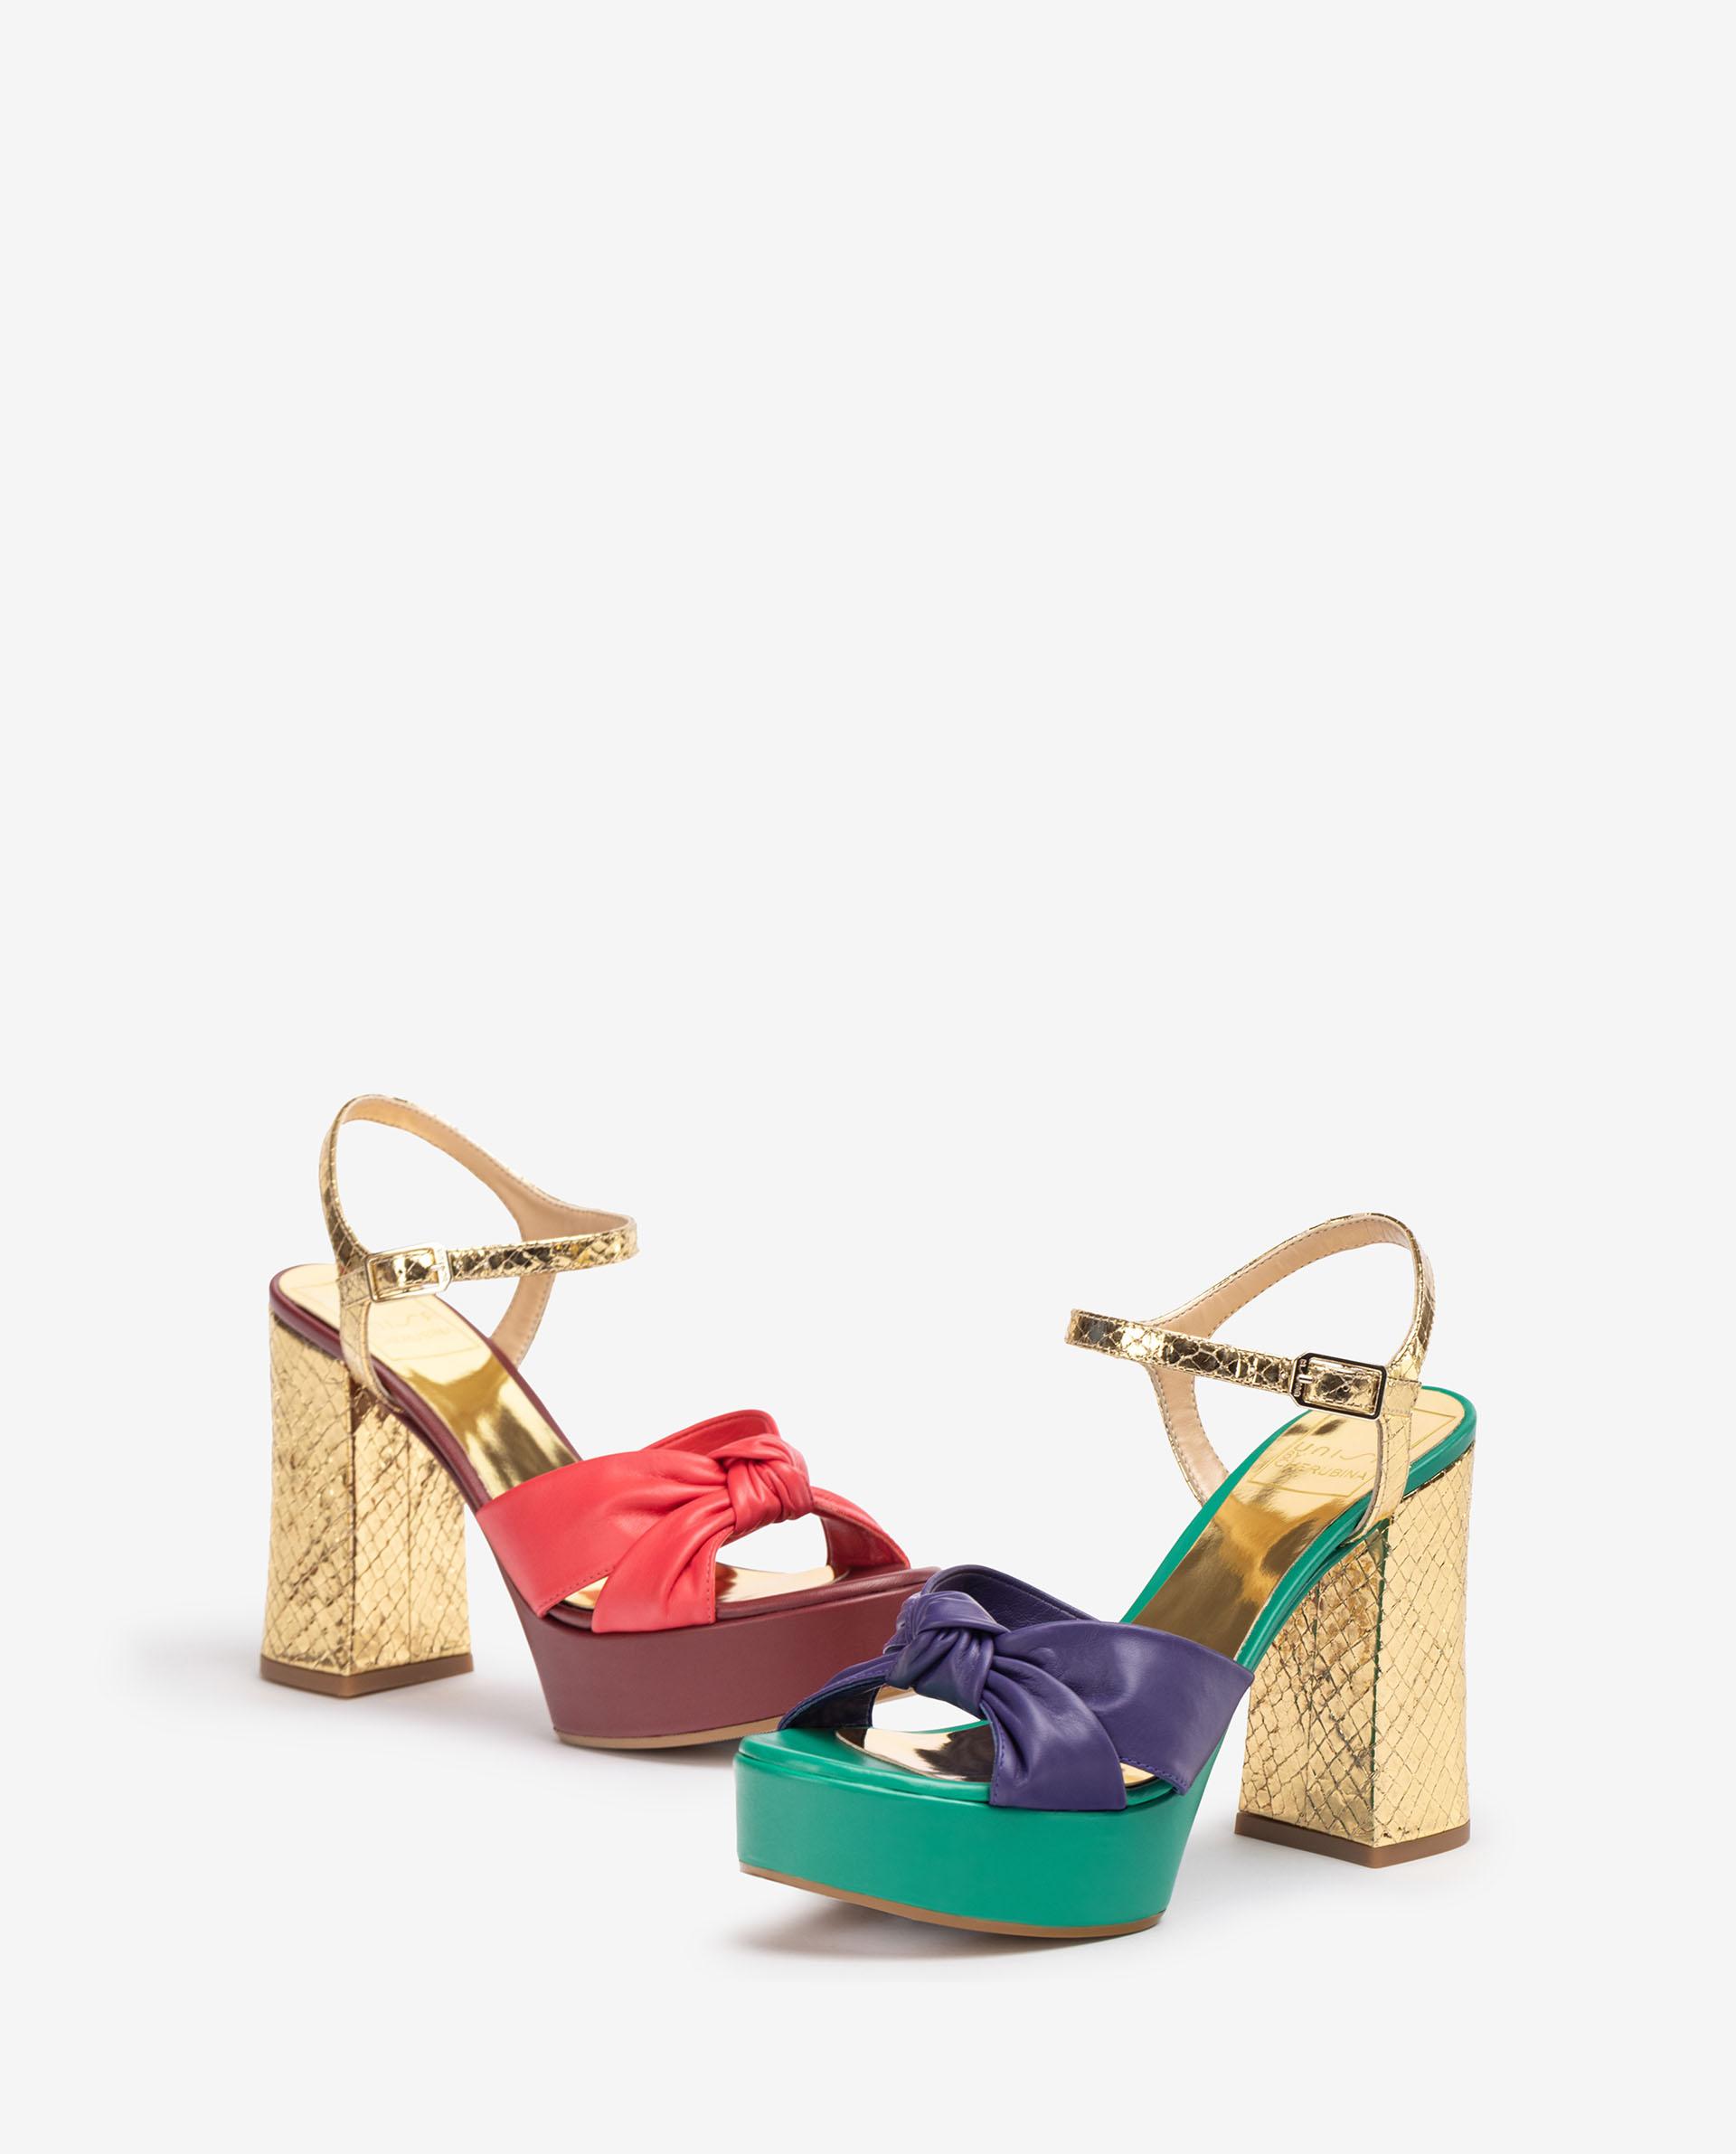 Unisa Unisa by Cherubina | Heeled Sandals and Party Shoes VIVIEN_NS_MTB coral/gold